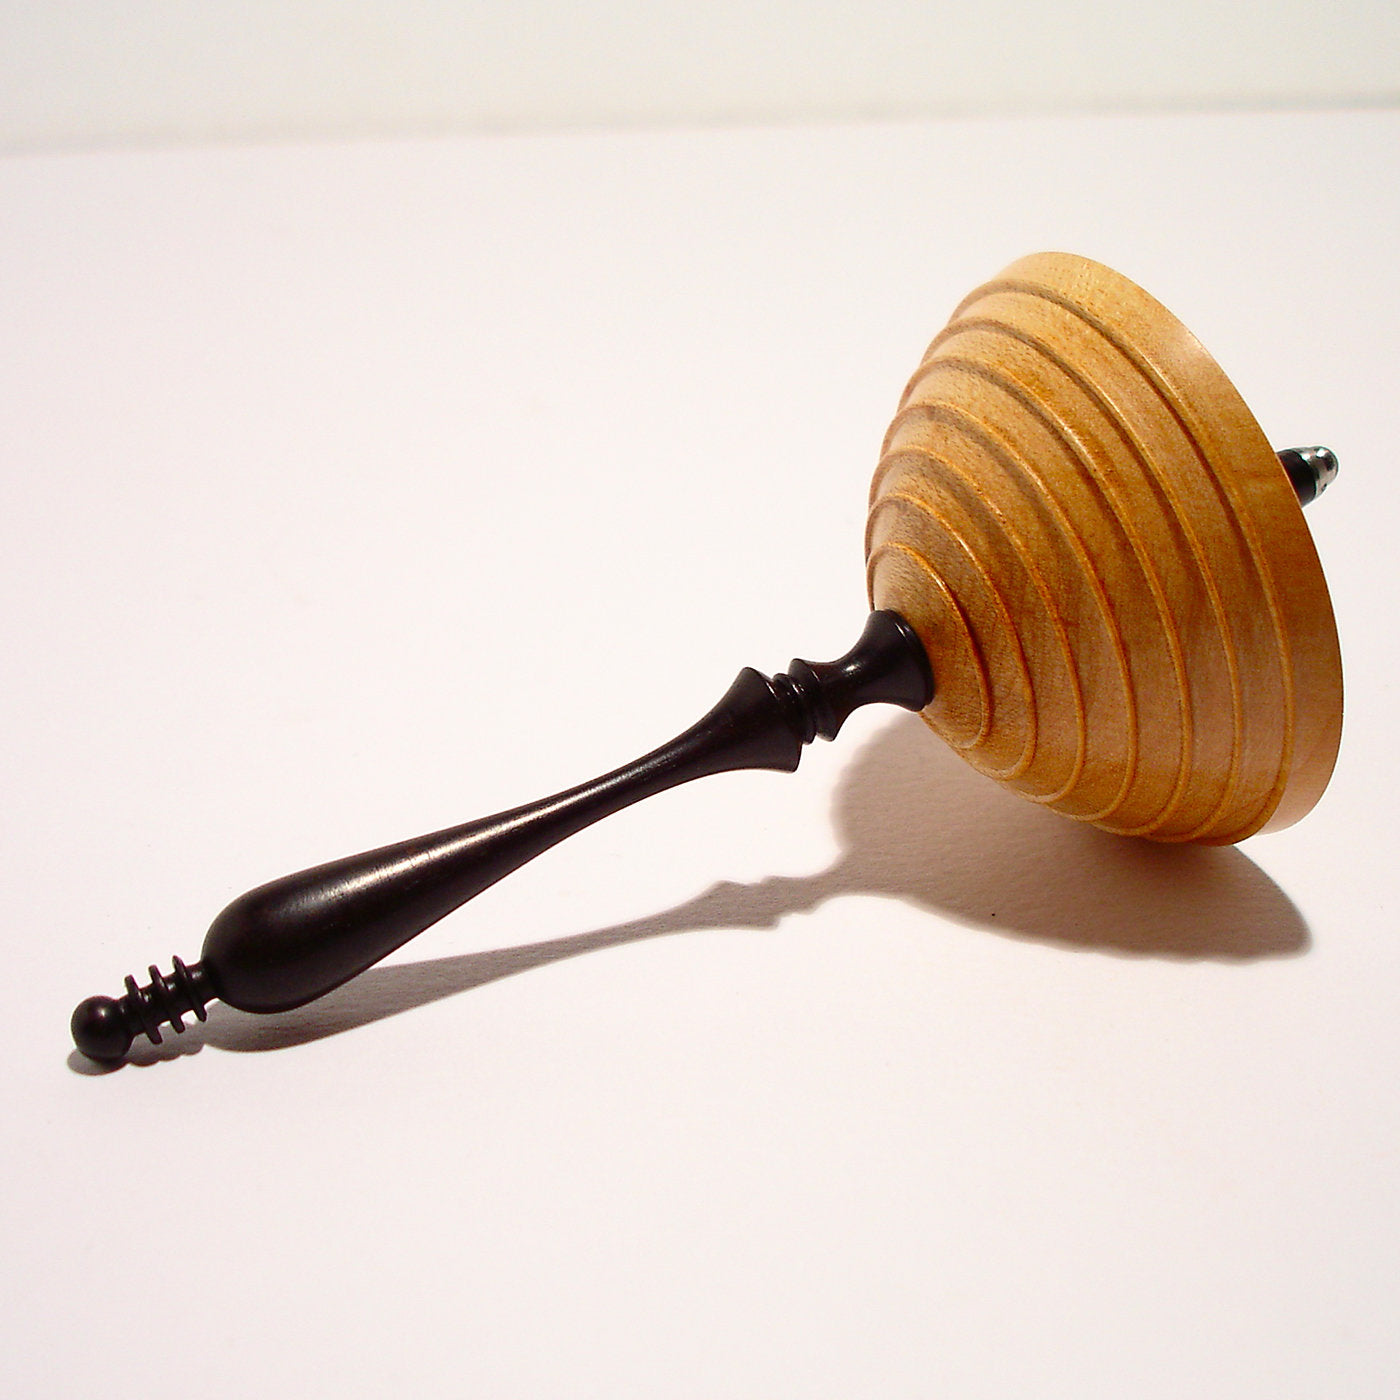 Ebony and Maple Spinning Top #3 - Alternative view 2